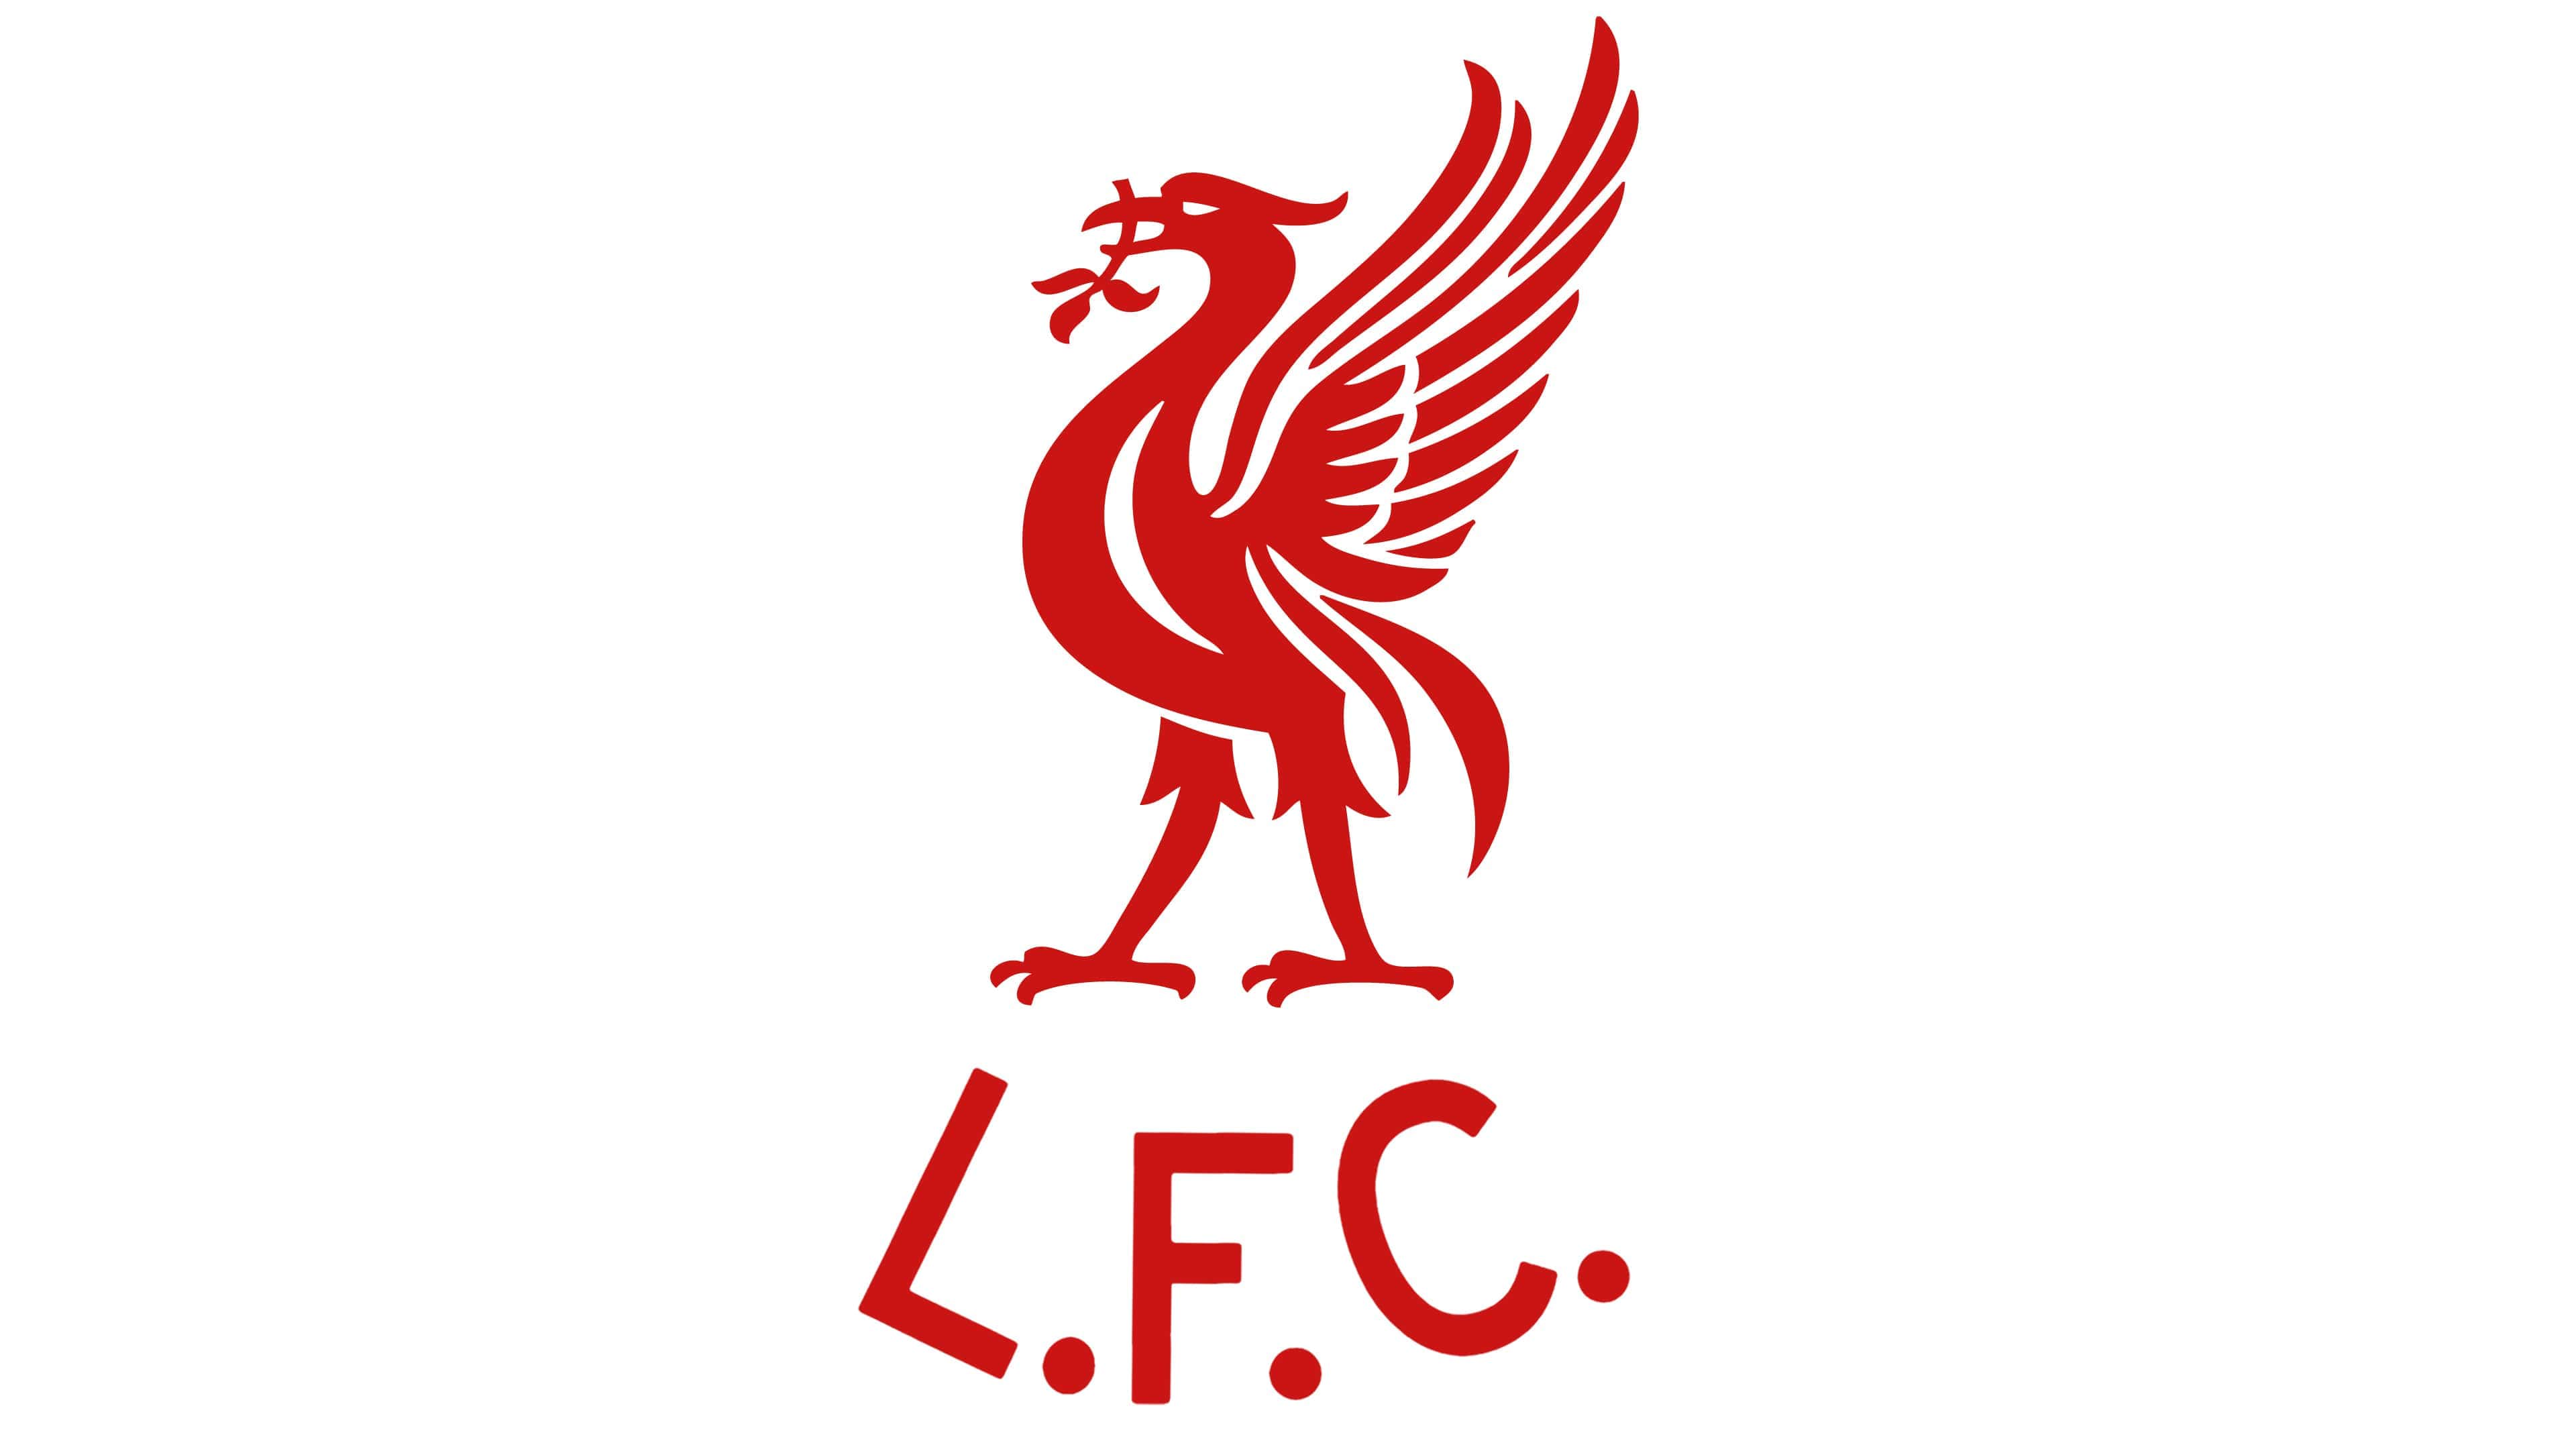 Liverpool Logo History The Most Famous Brands And Company Logos In The World